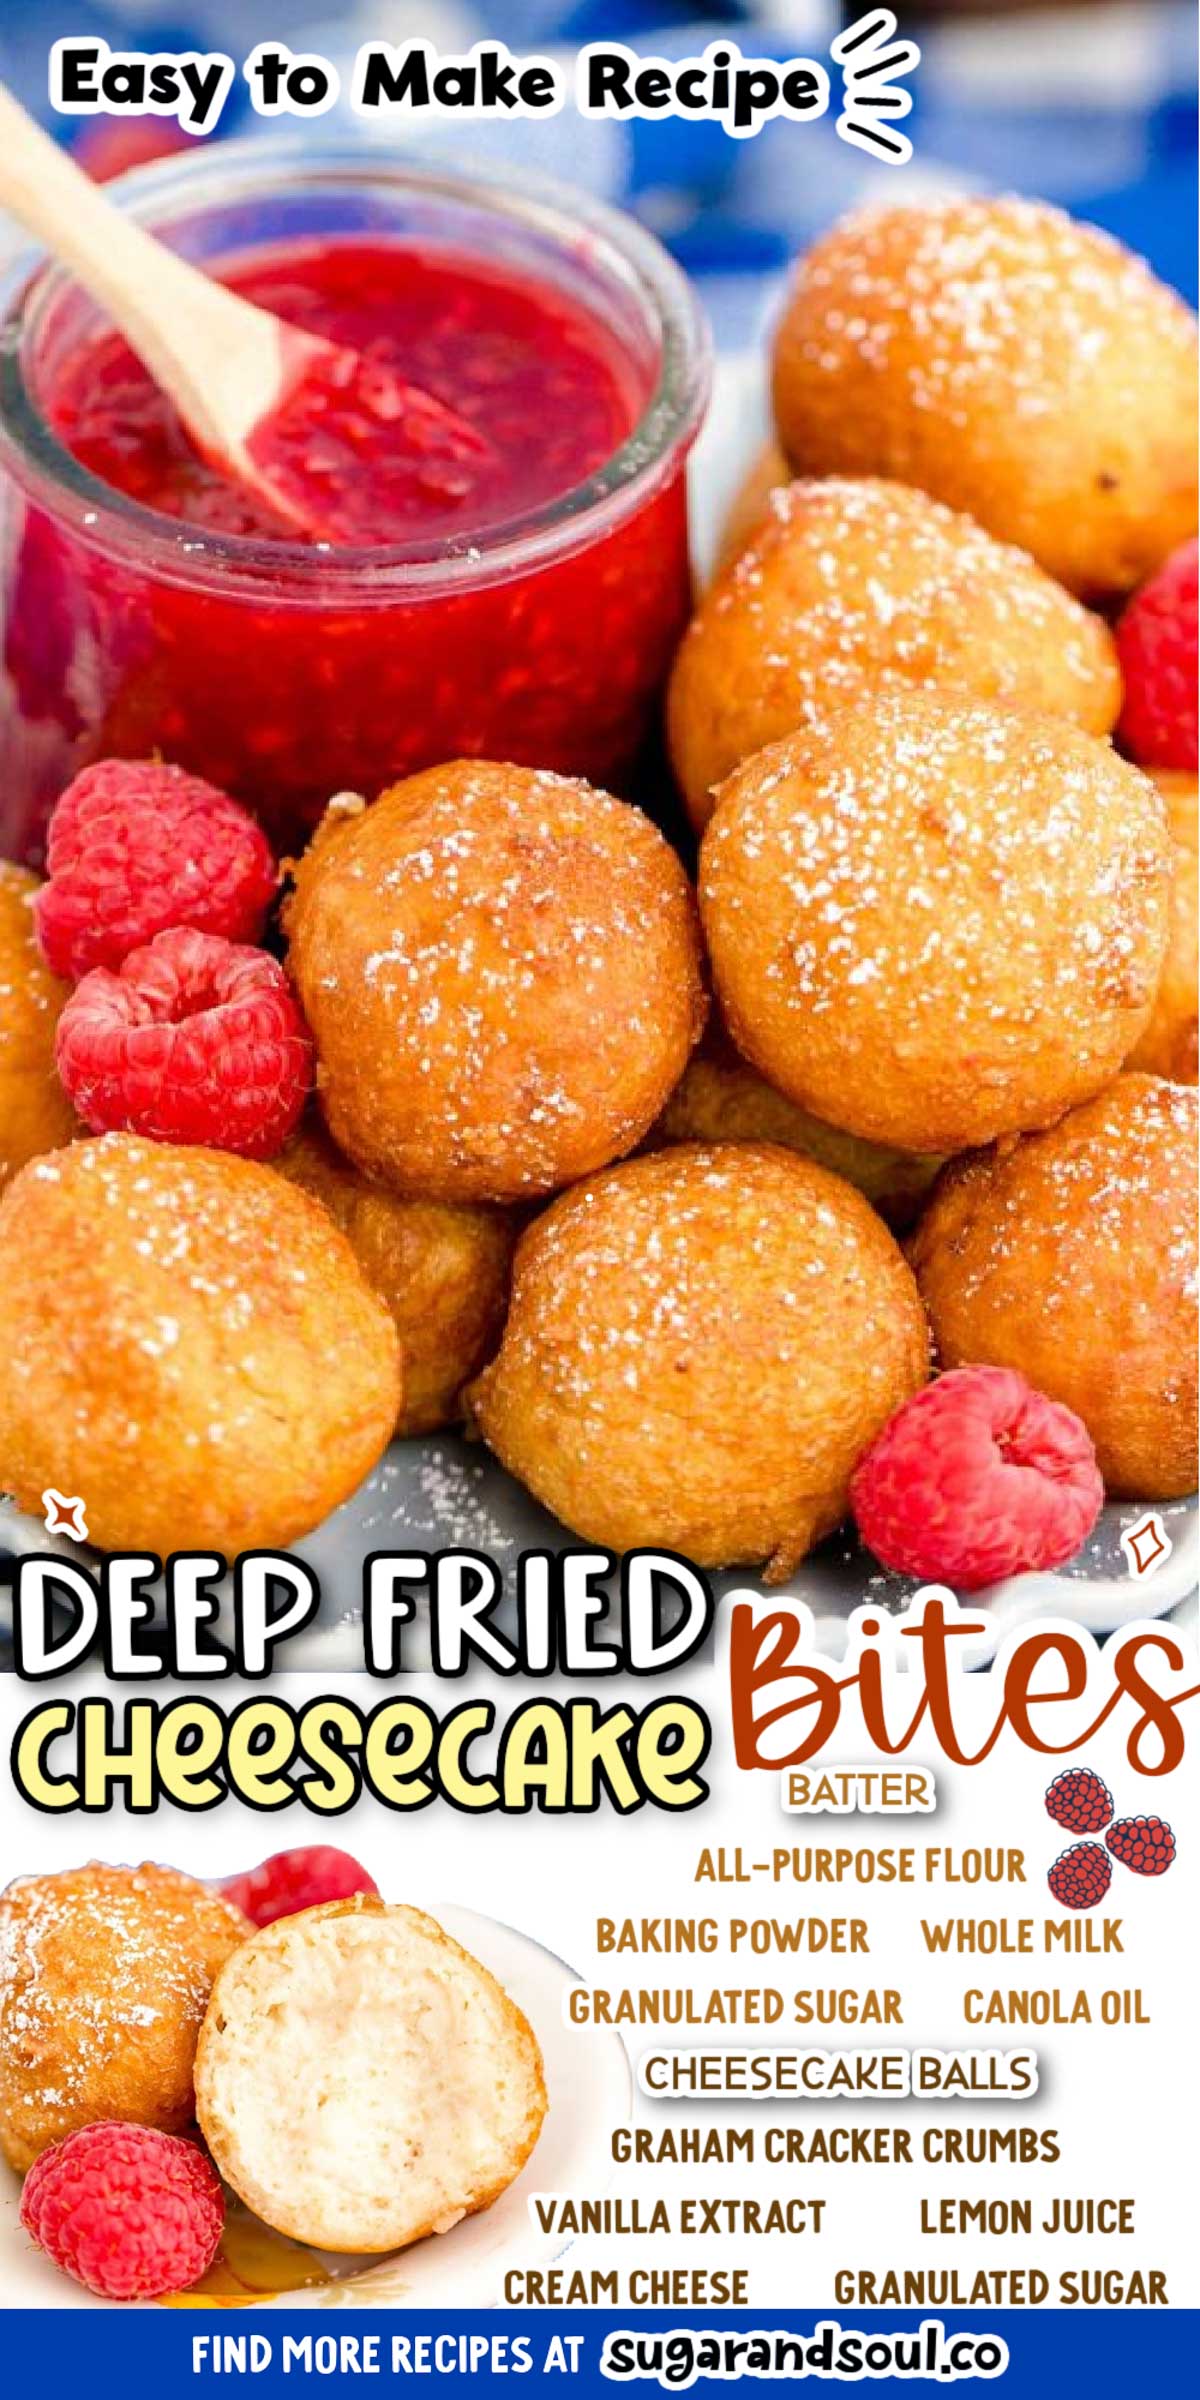 Deep Fried Cheesecake Bites have a creamy, 5 ingredient filling that's coated in an easy-to-make batter and then deep-fried to golden brown perfection! Prep this delicious treat in just 15 minutes! via @sugarandsoulco